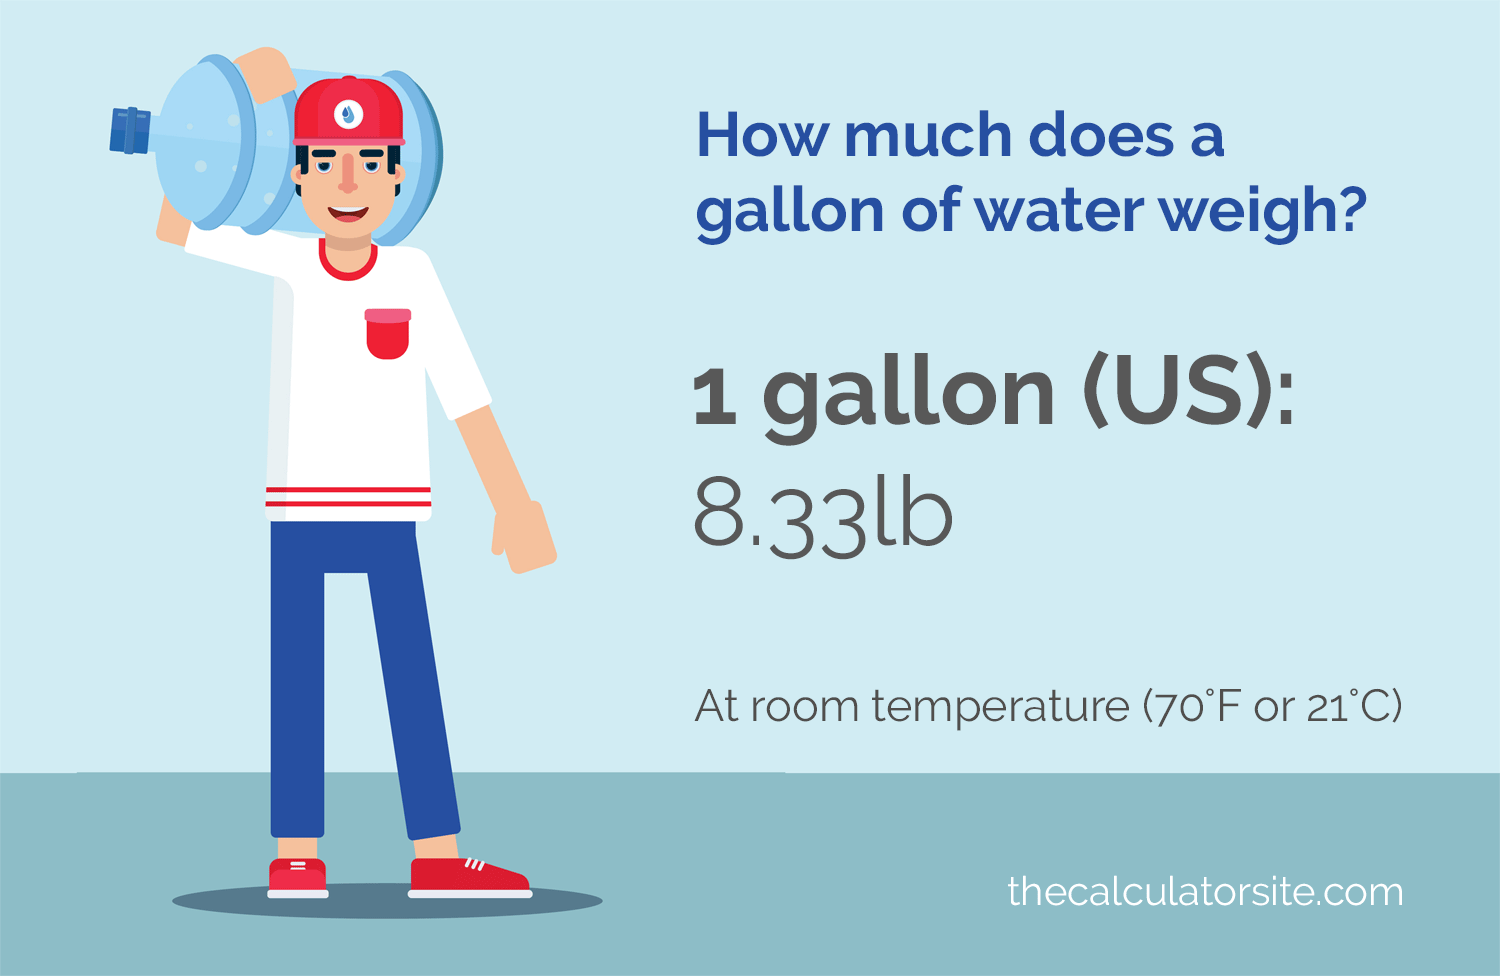 Gallon of water weight in pounds